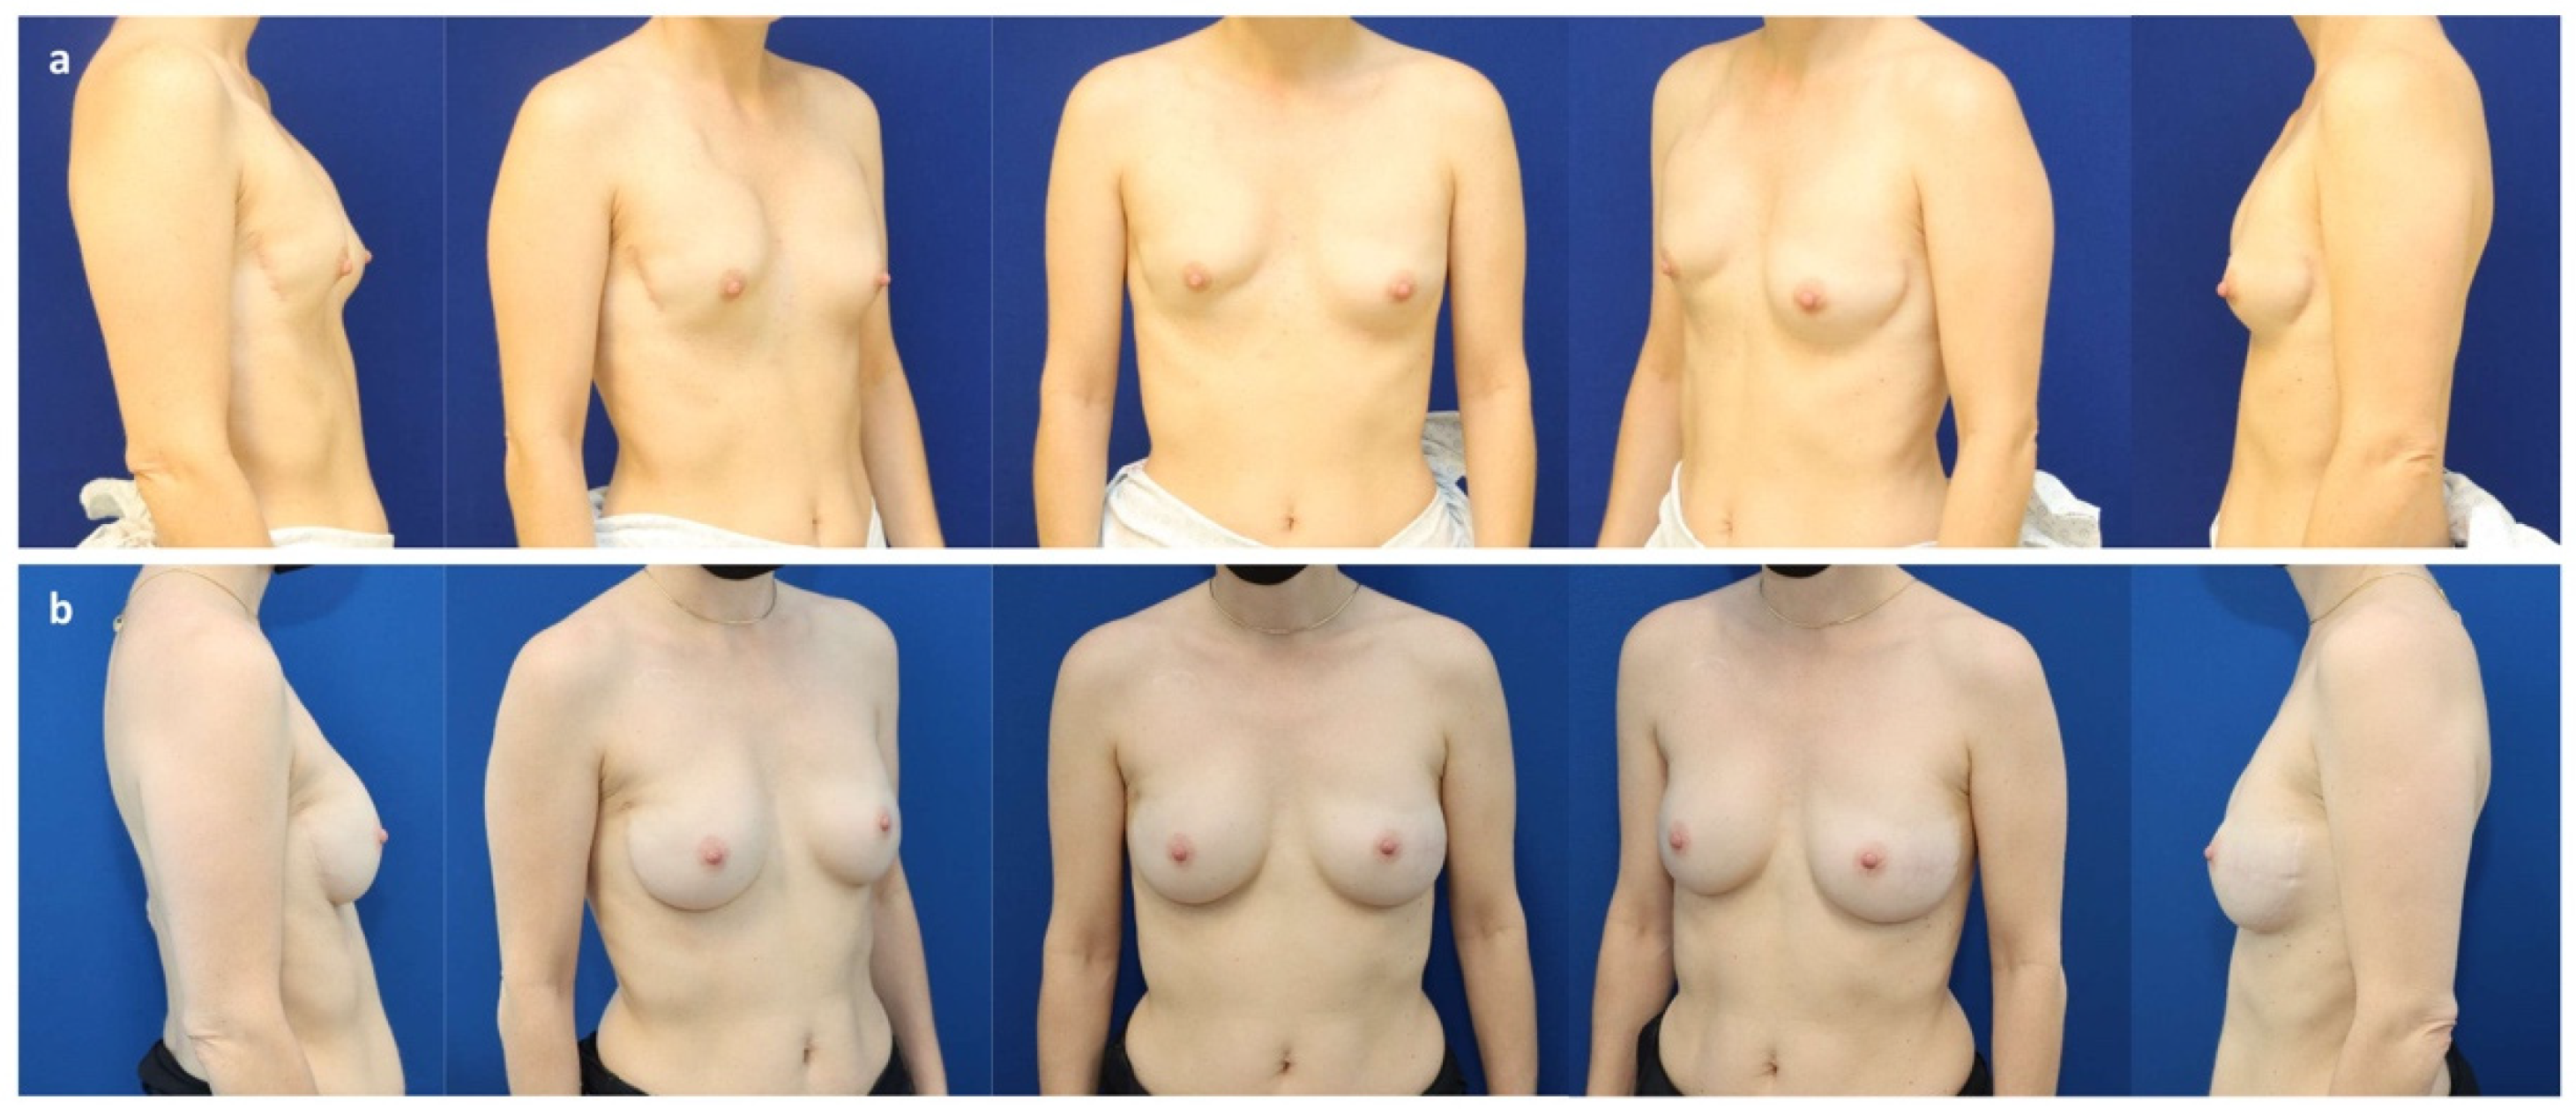 JCM Free Full-Text Implant-Based Breast Reconstruction after Mastectomy, from the Subpectoral to the Prepectoral Approach An Evidence-Based Change of Mind?